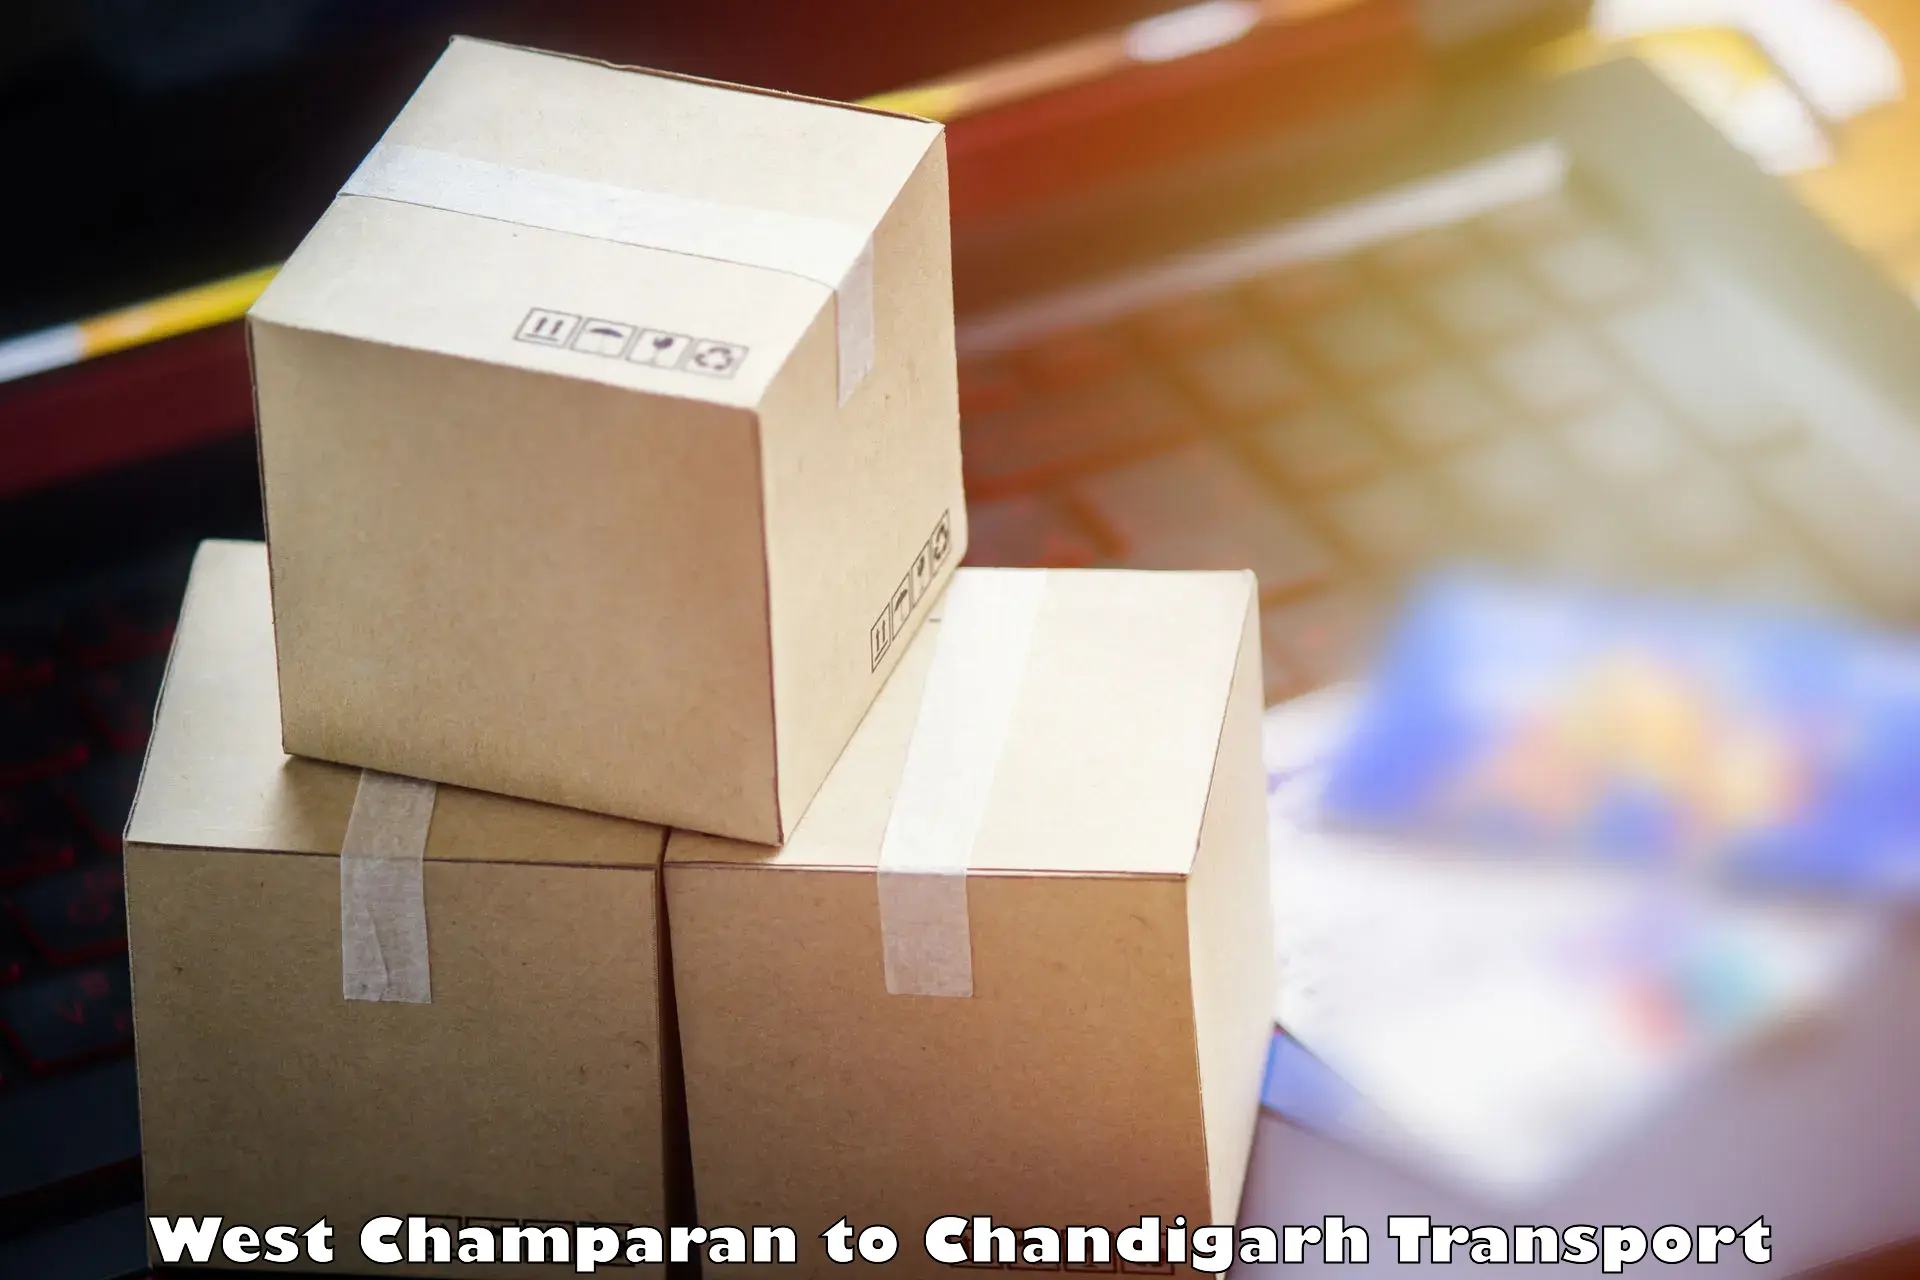 Cargo transport services in West Champaran to Chandigarh